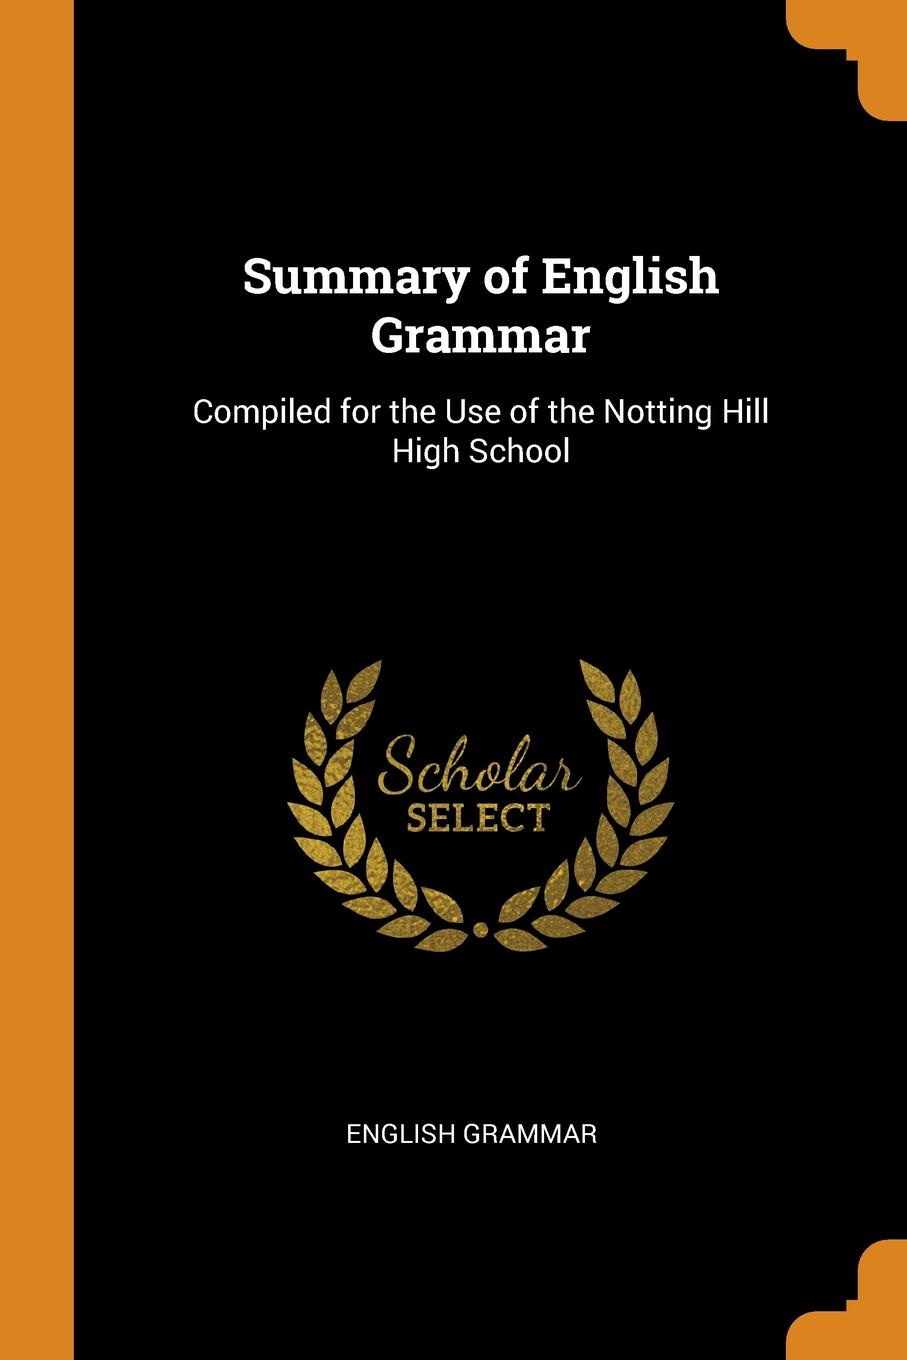 Summary of English Grammar. Compiled for the Use of the Notting Hill High School